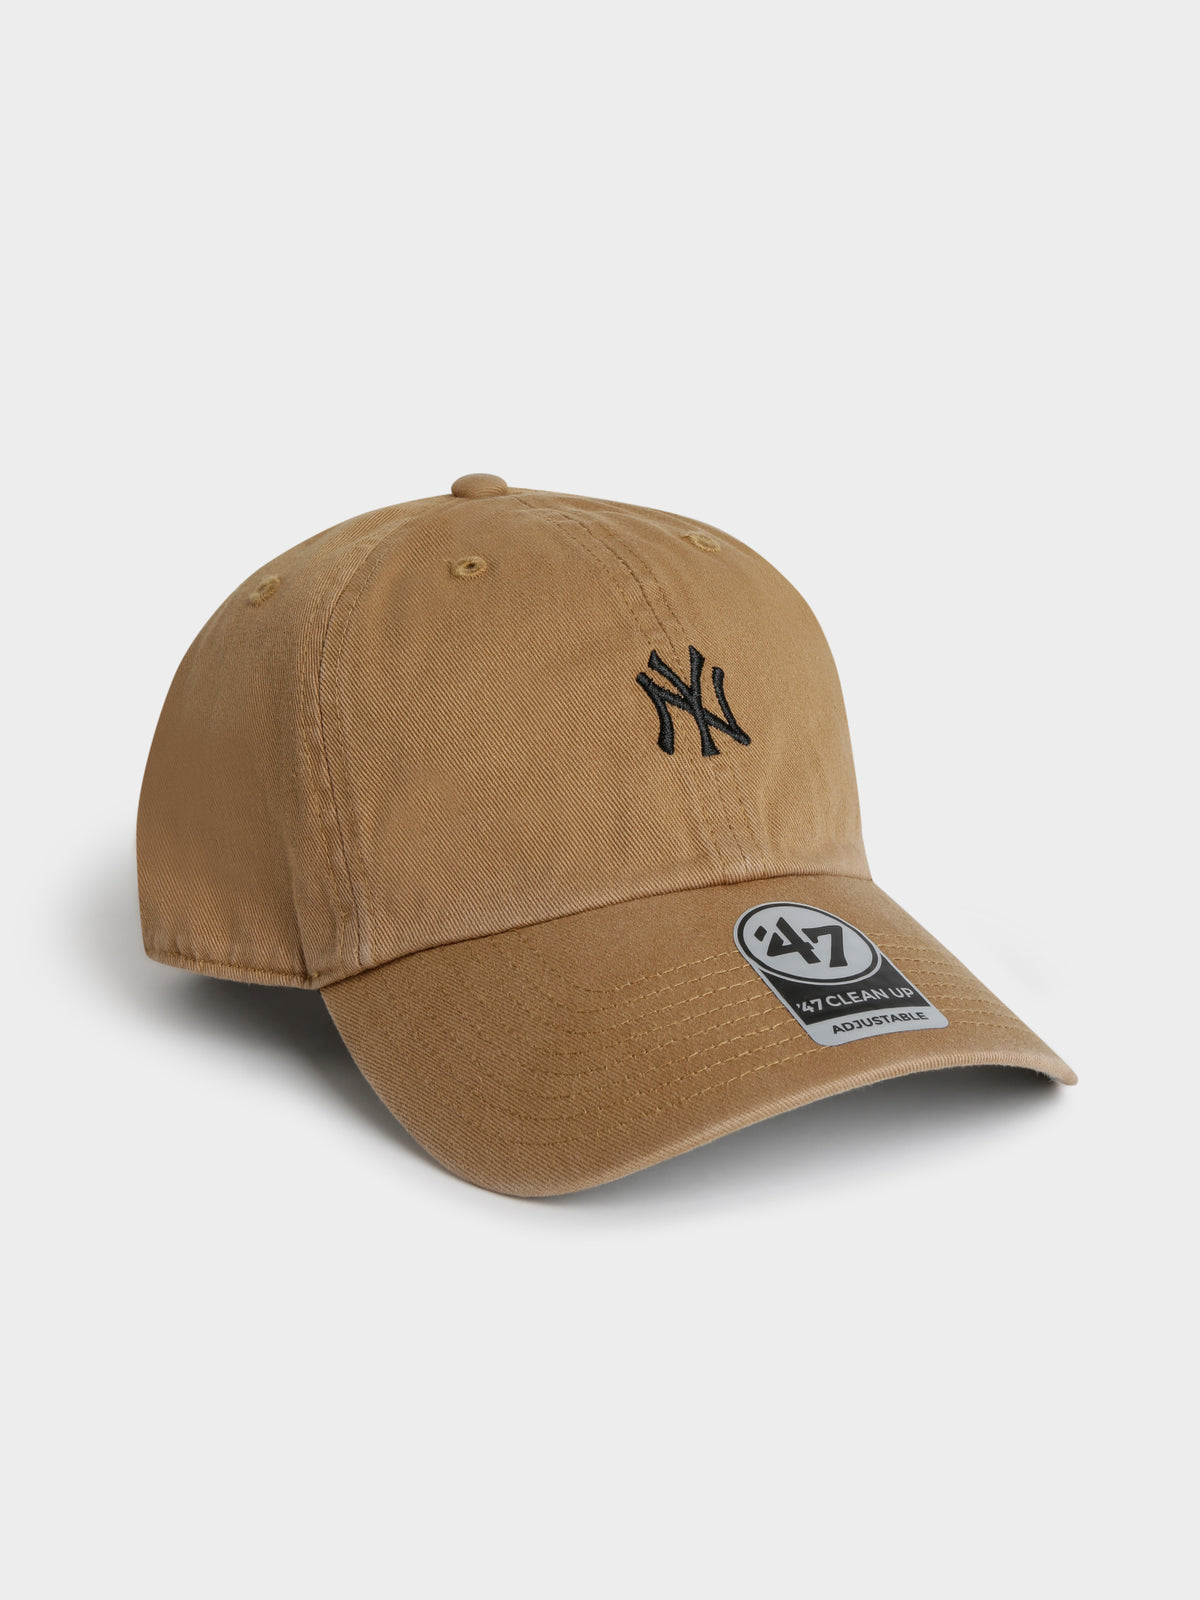 NY Yankees 47 Clean Up Cap in Camel